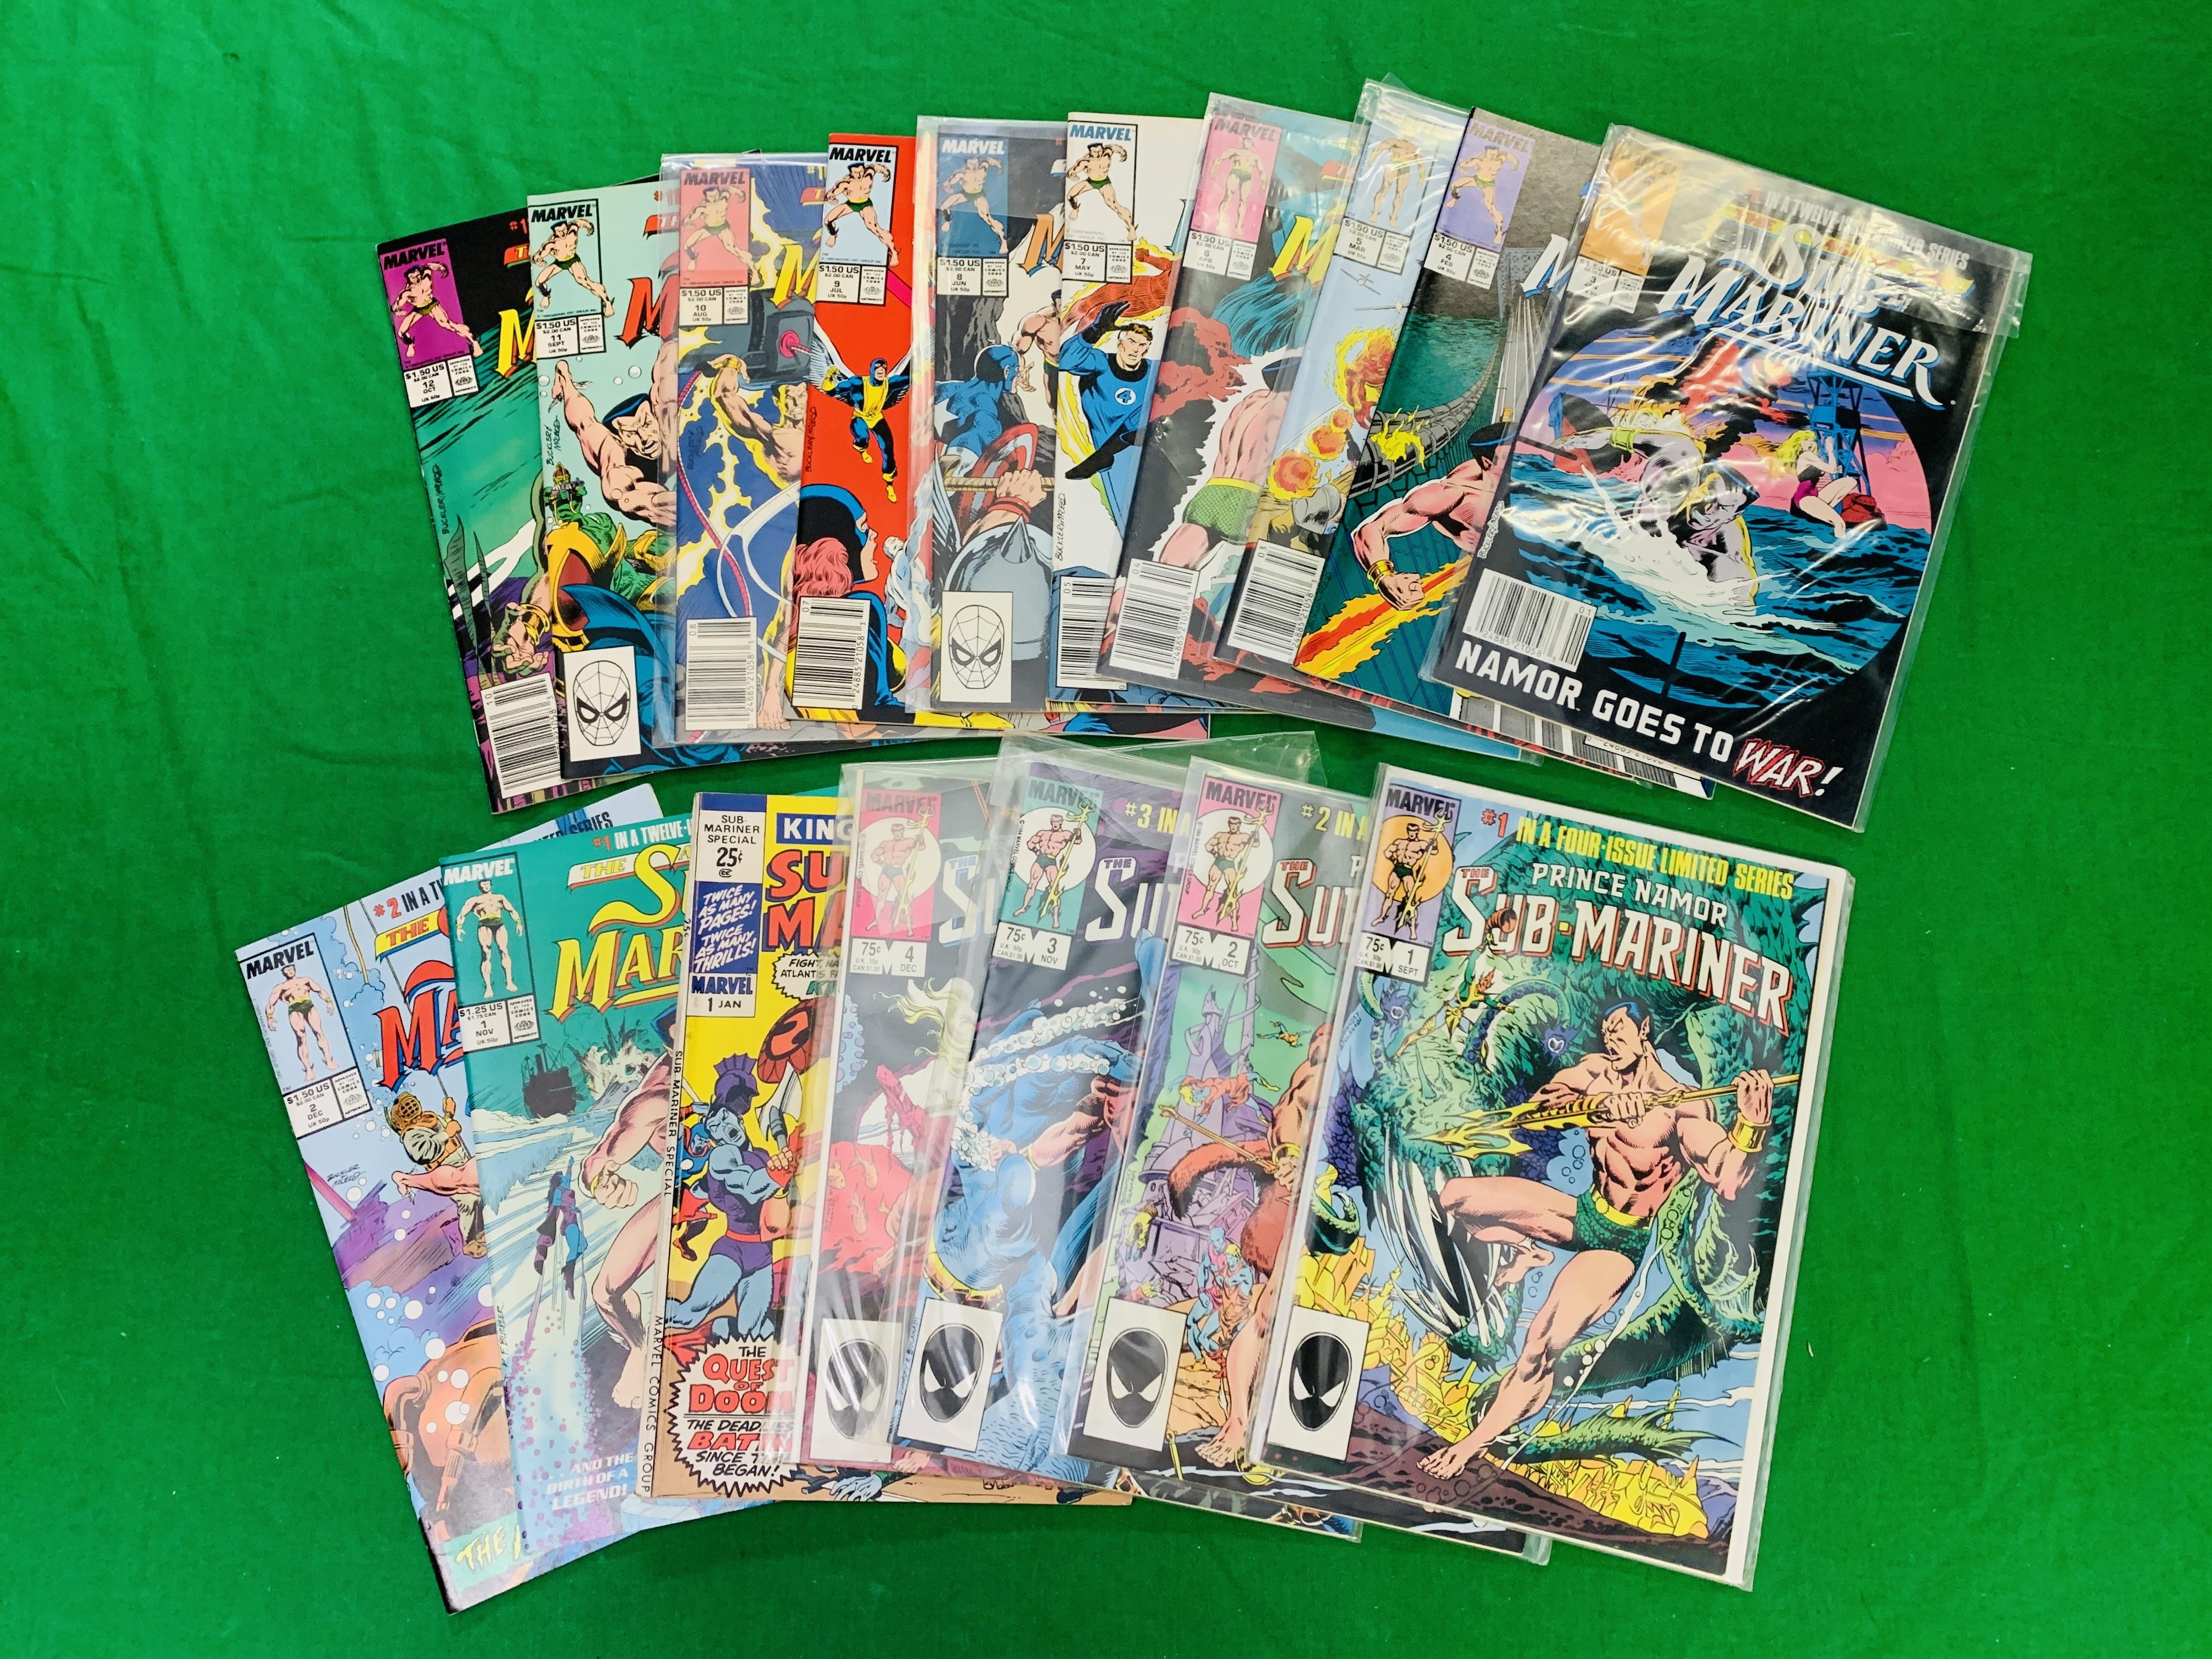 MARVEL COMICS THE SUBMARINER LIMITED SERIES NO. 1 - 4 FROM 1984. NO. 1 - 12 FROM 1988, NO.